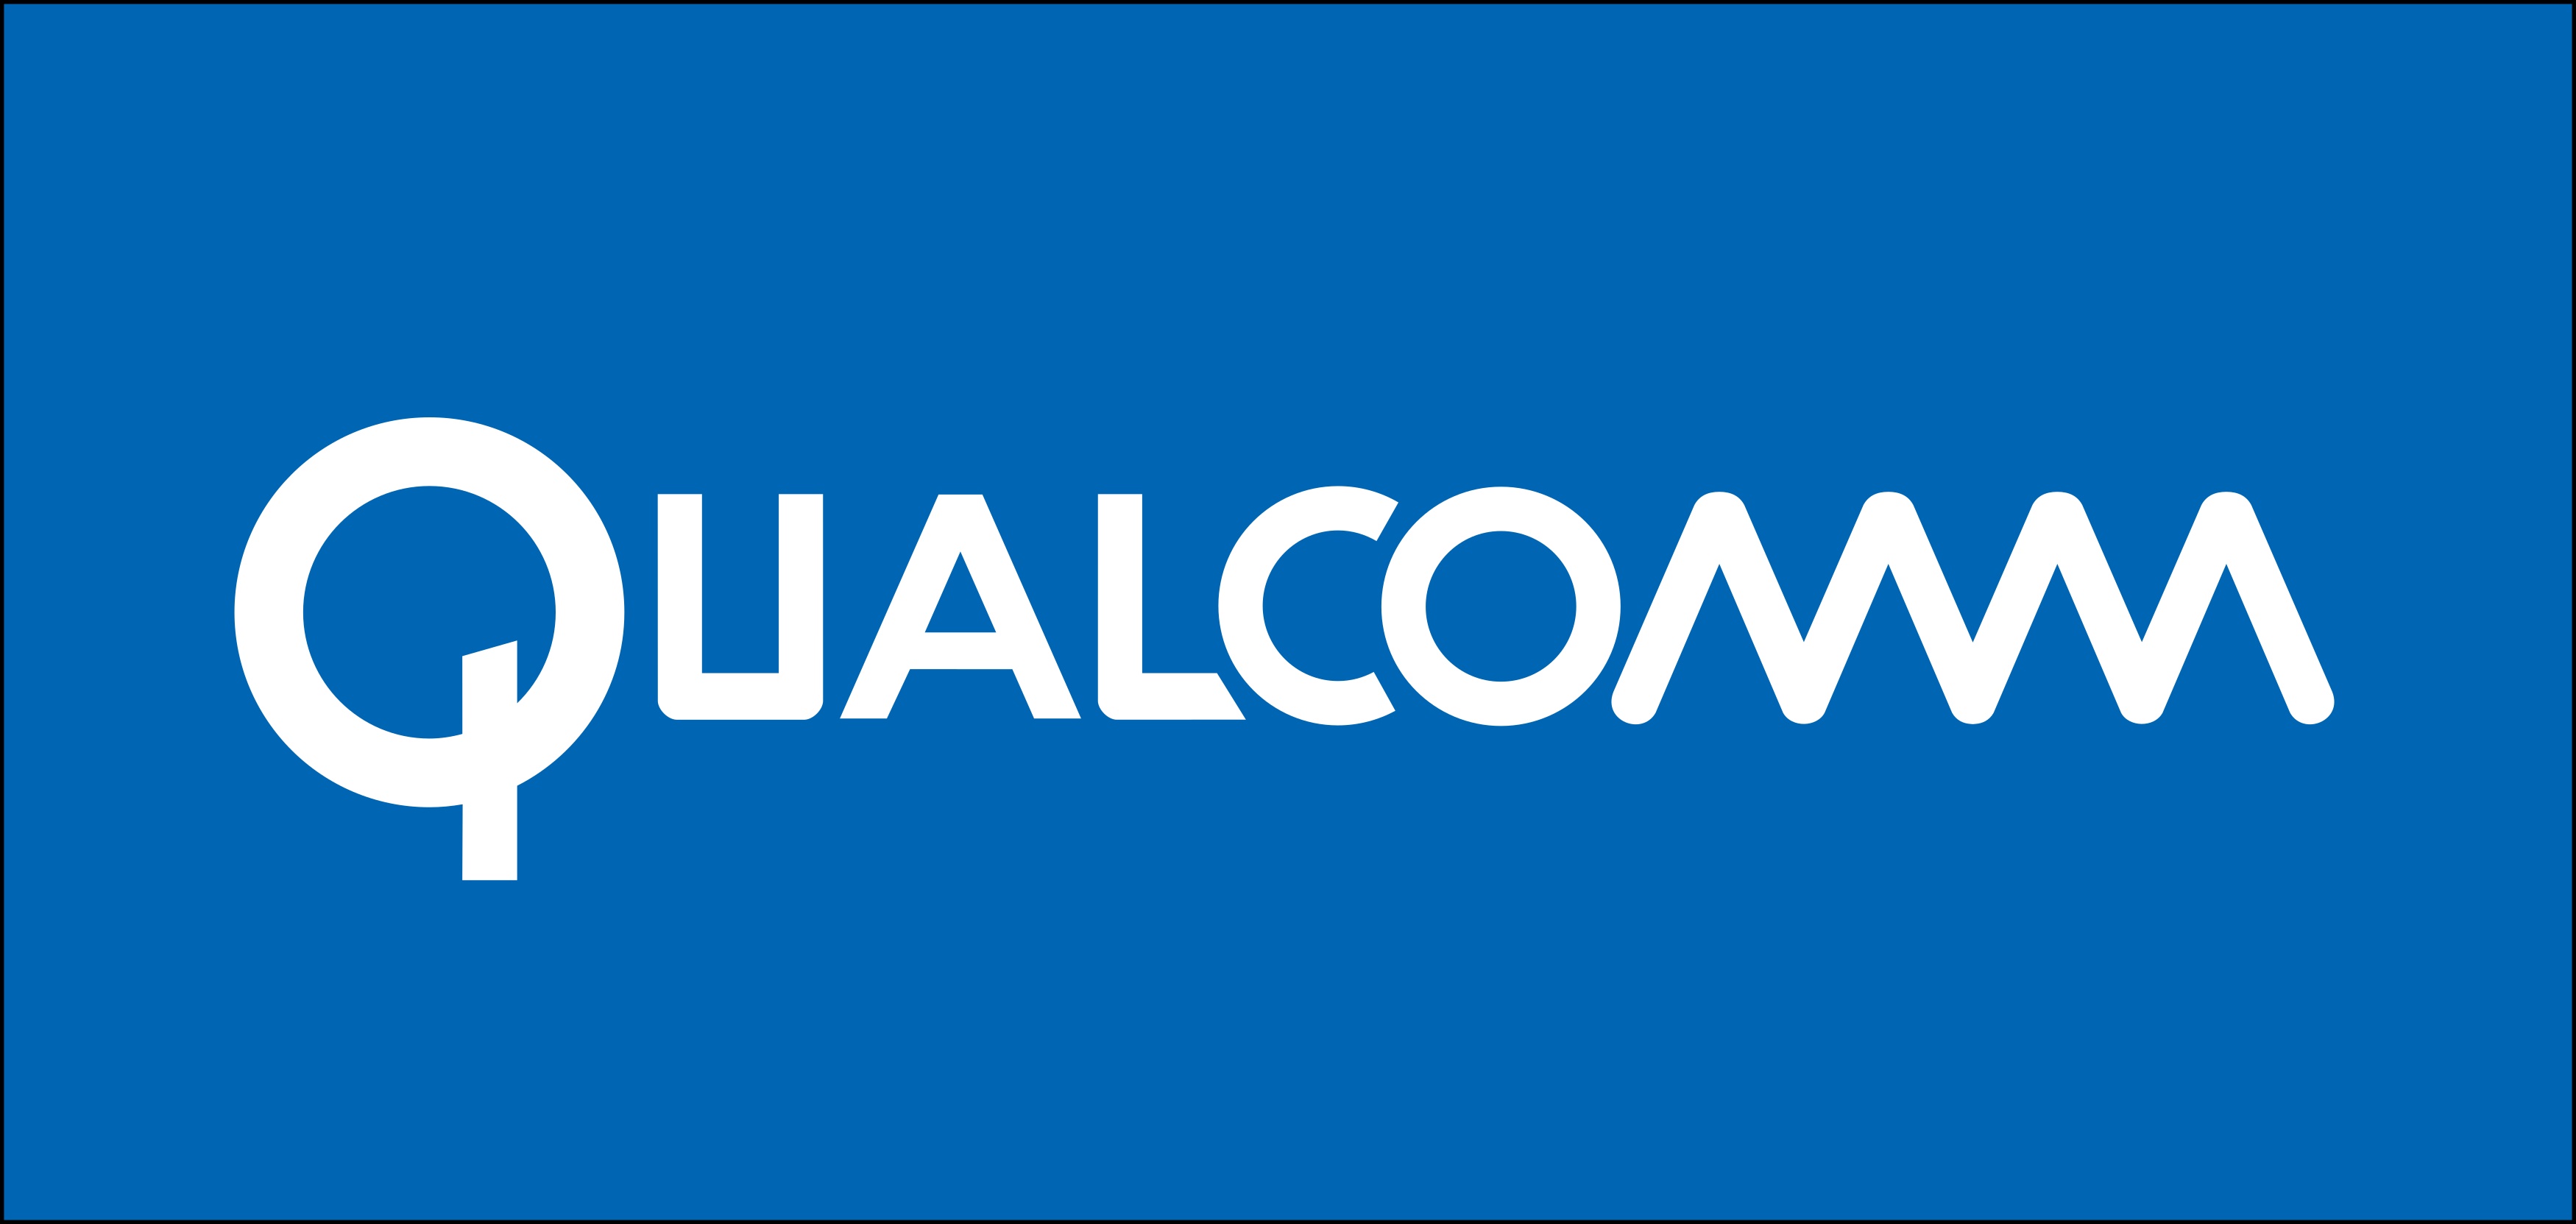 Taiwanese media: Qualcomm, Marvell, Intel and TSMC will raise chip prices